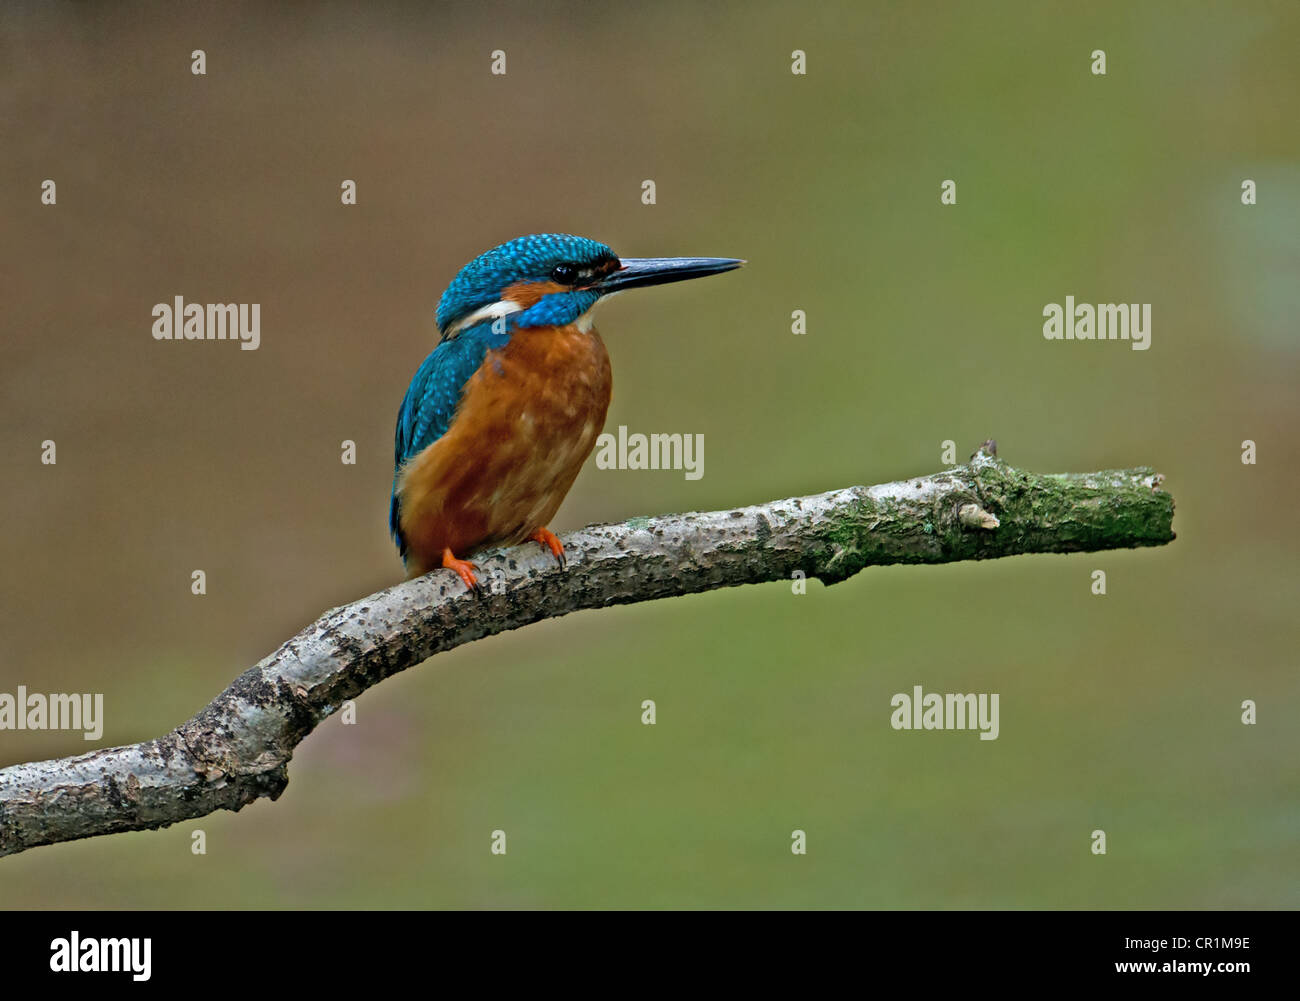 MALE KINGFISHER ALCEDO ATTHIS PERCHED ON BRANCH. UK Stock Photo